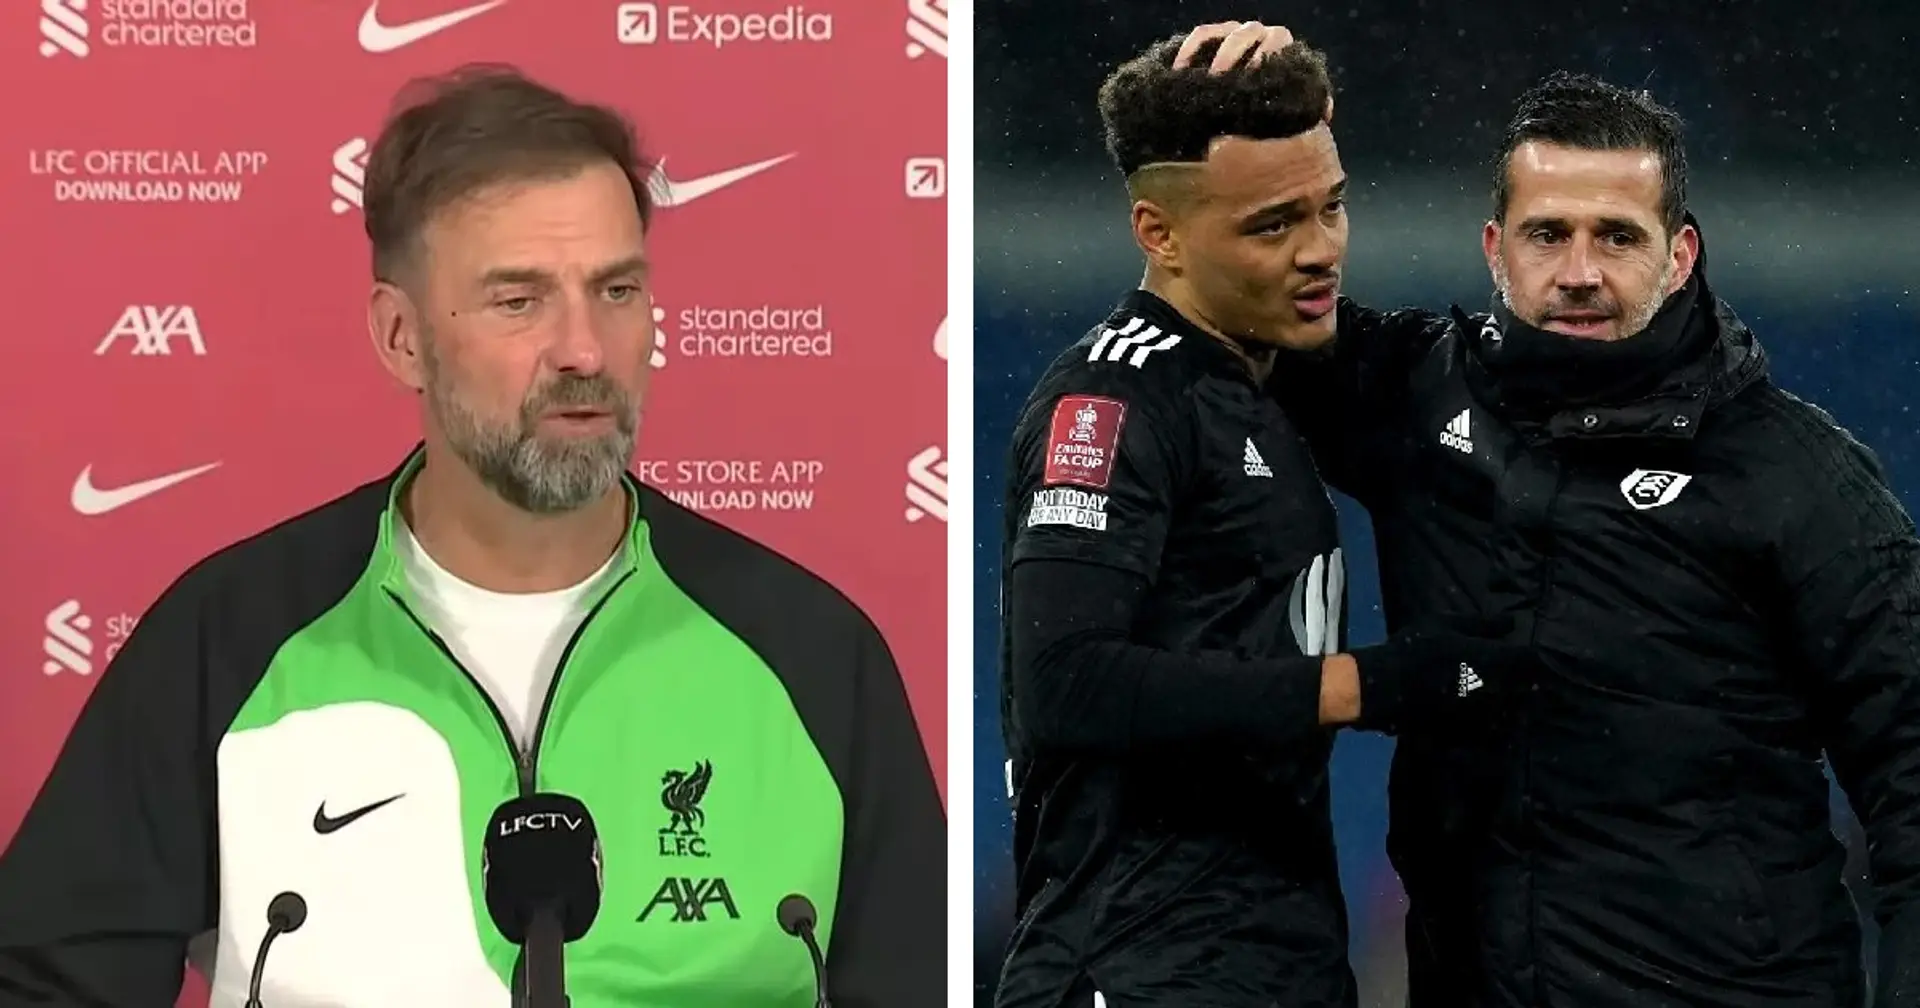 'They had a bit of a strange season': Klopp assesses Fulham threat ahead of Cottagers clash